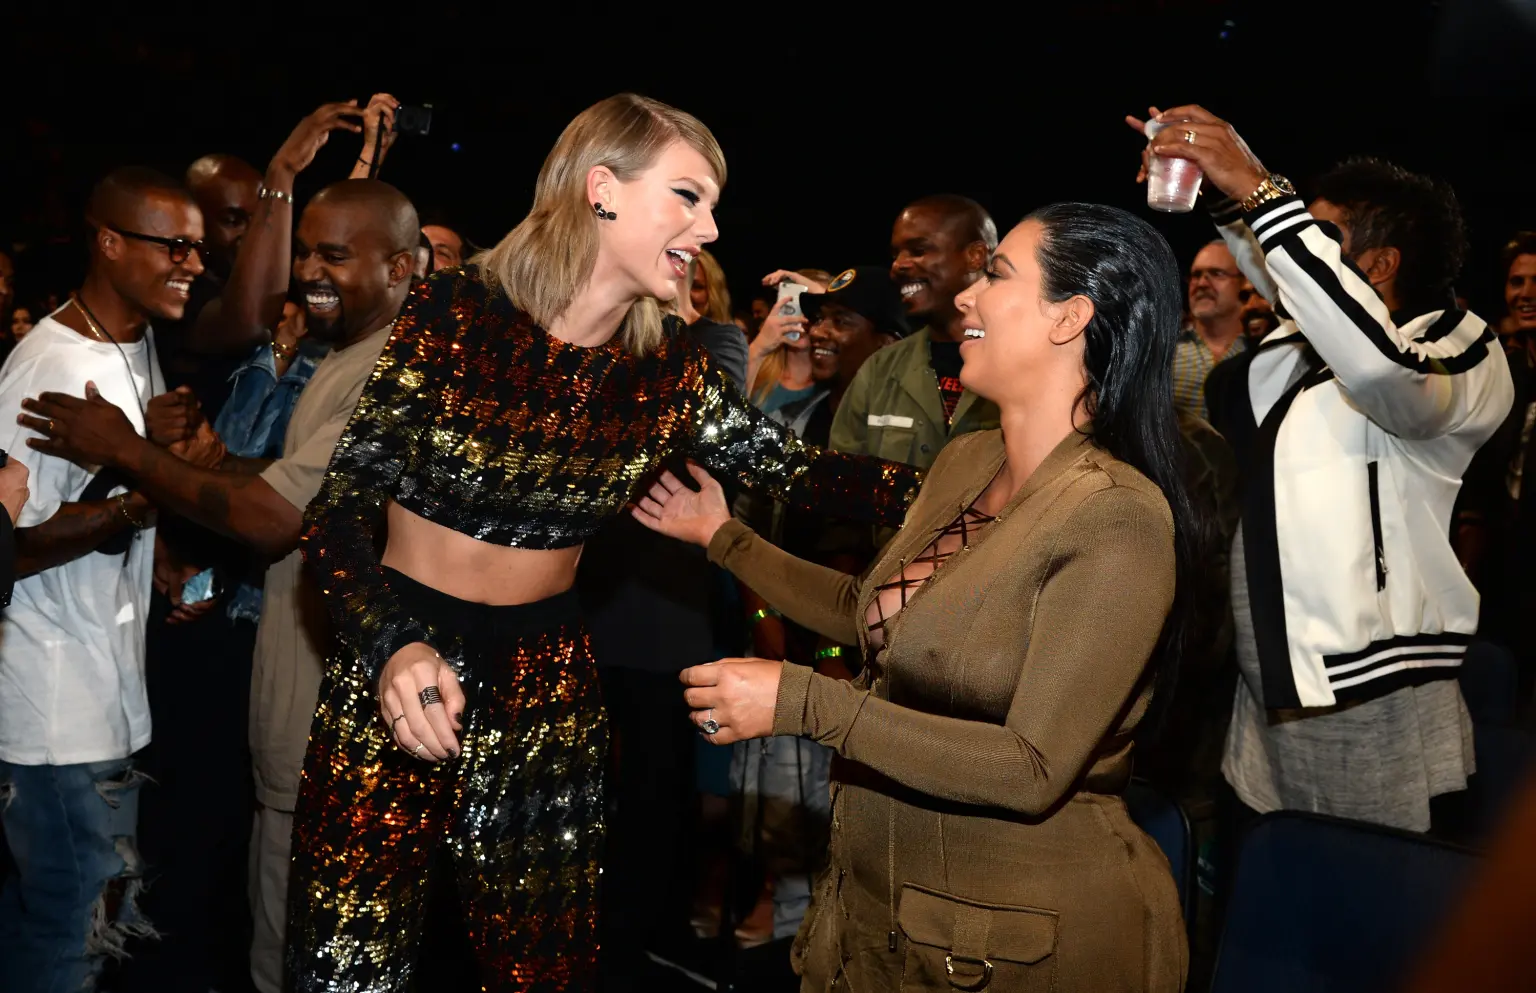 Kim Kardashian loses over 100K followers after Taylor Swift’s diss track